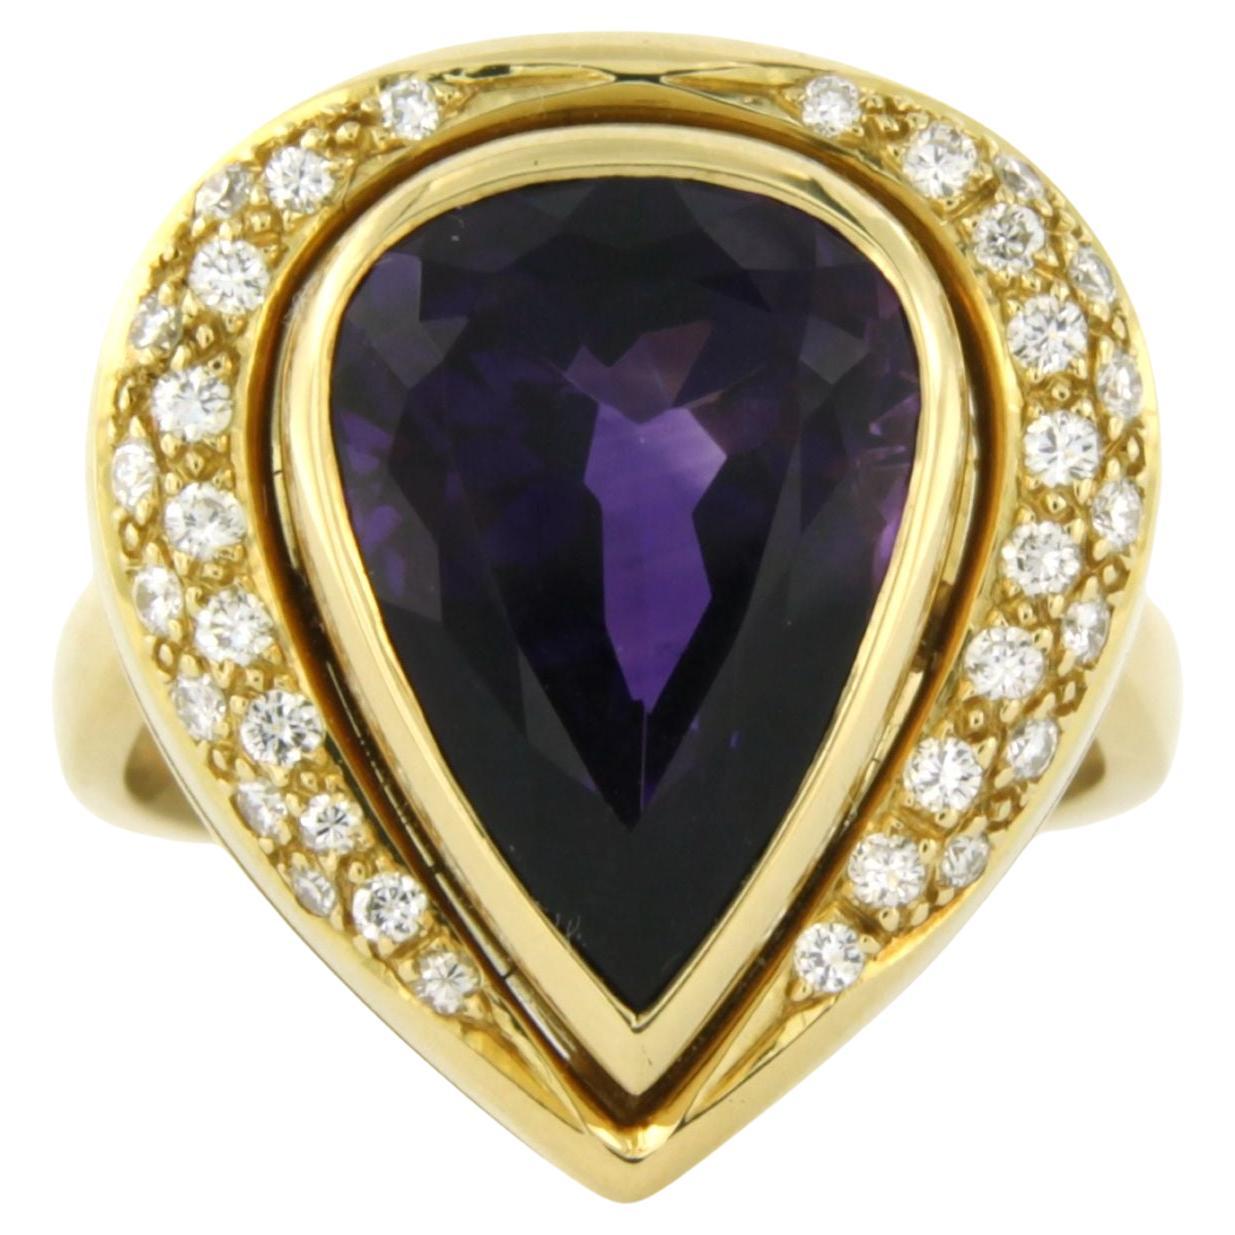 Ring with amethyst and diamonds 18k yellow gold